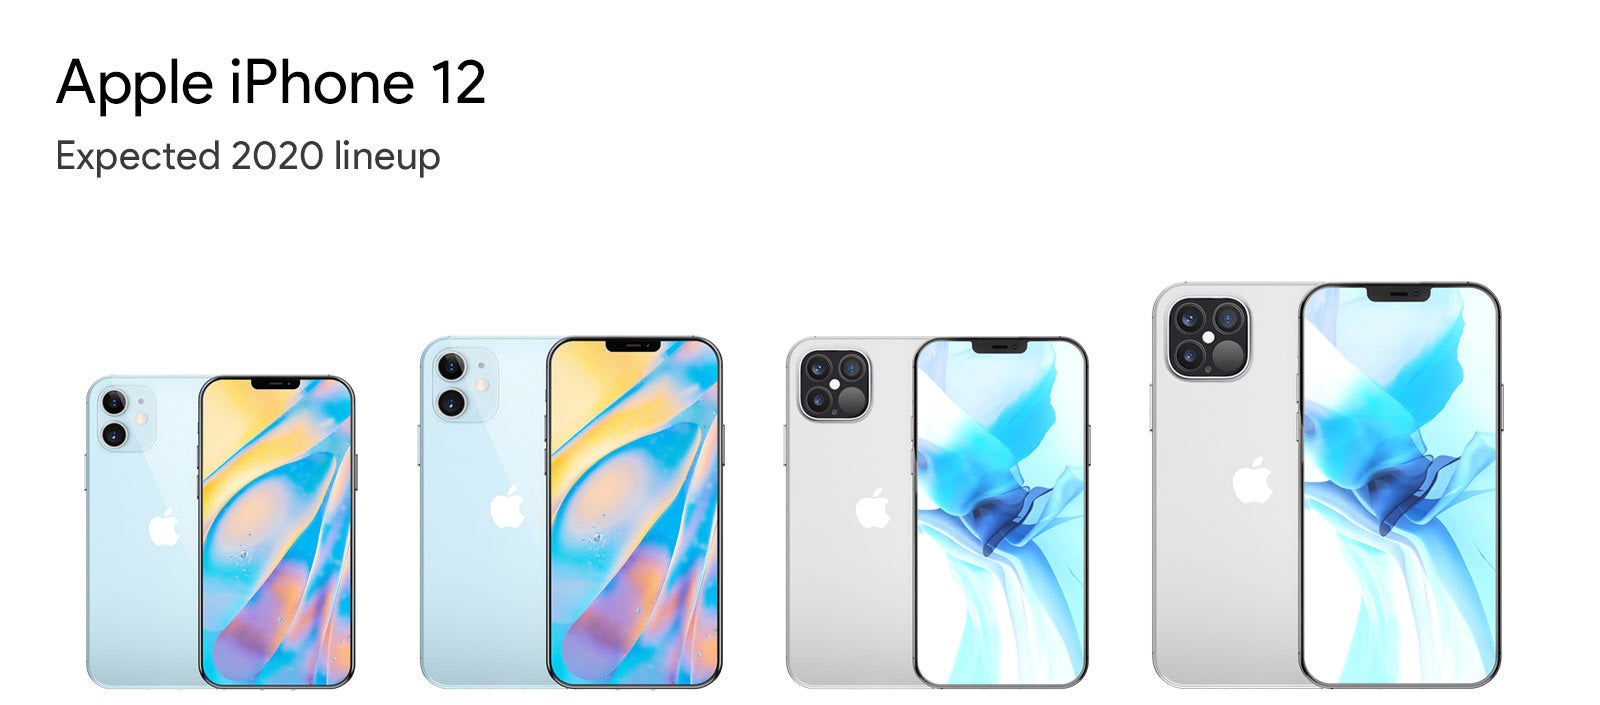 This Tuesday, Apple will unveil four new 5G iPhone models - Top analyst predicts which 5G iPhone will be the most popular model this year